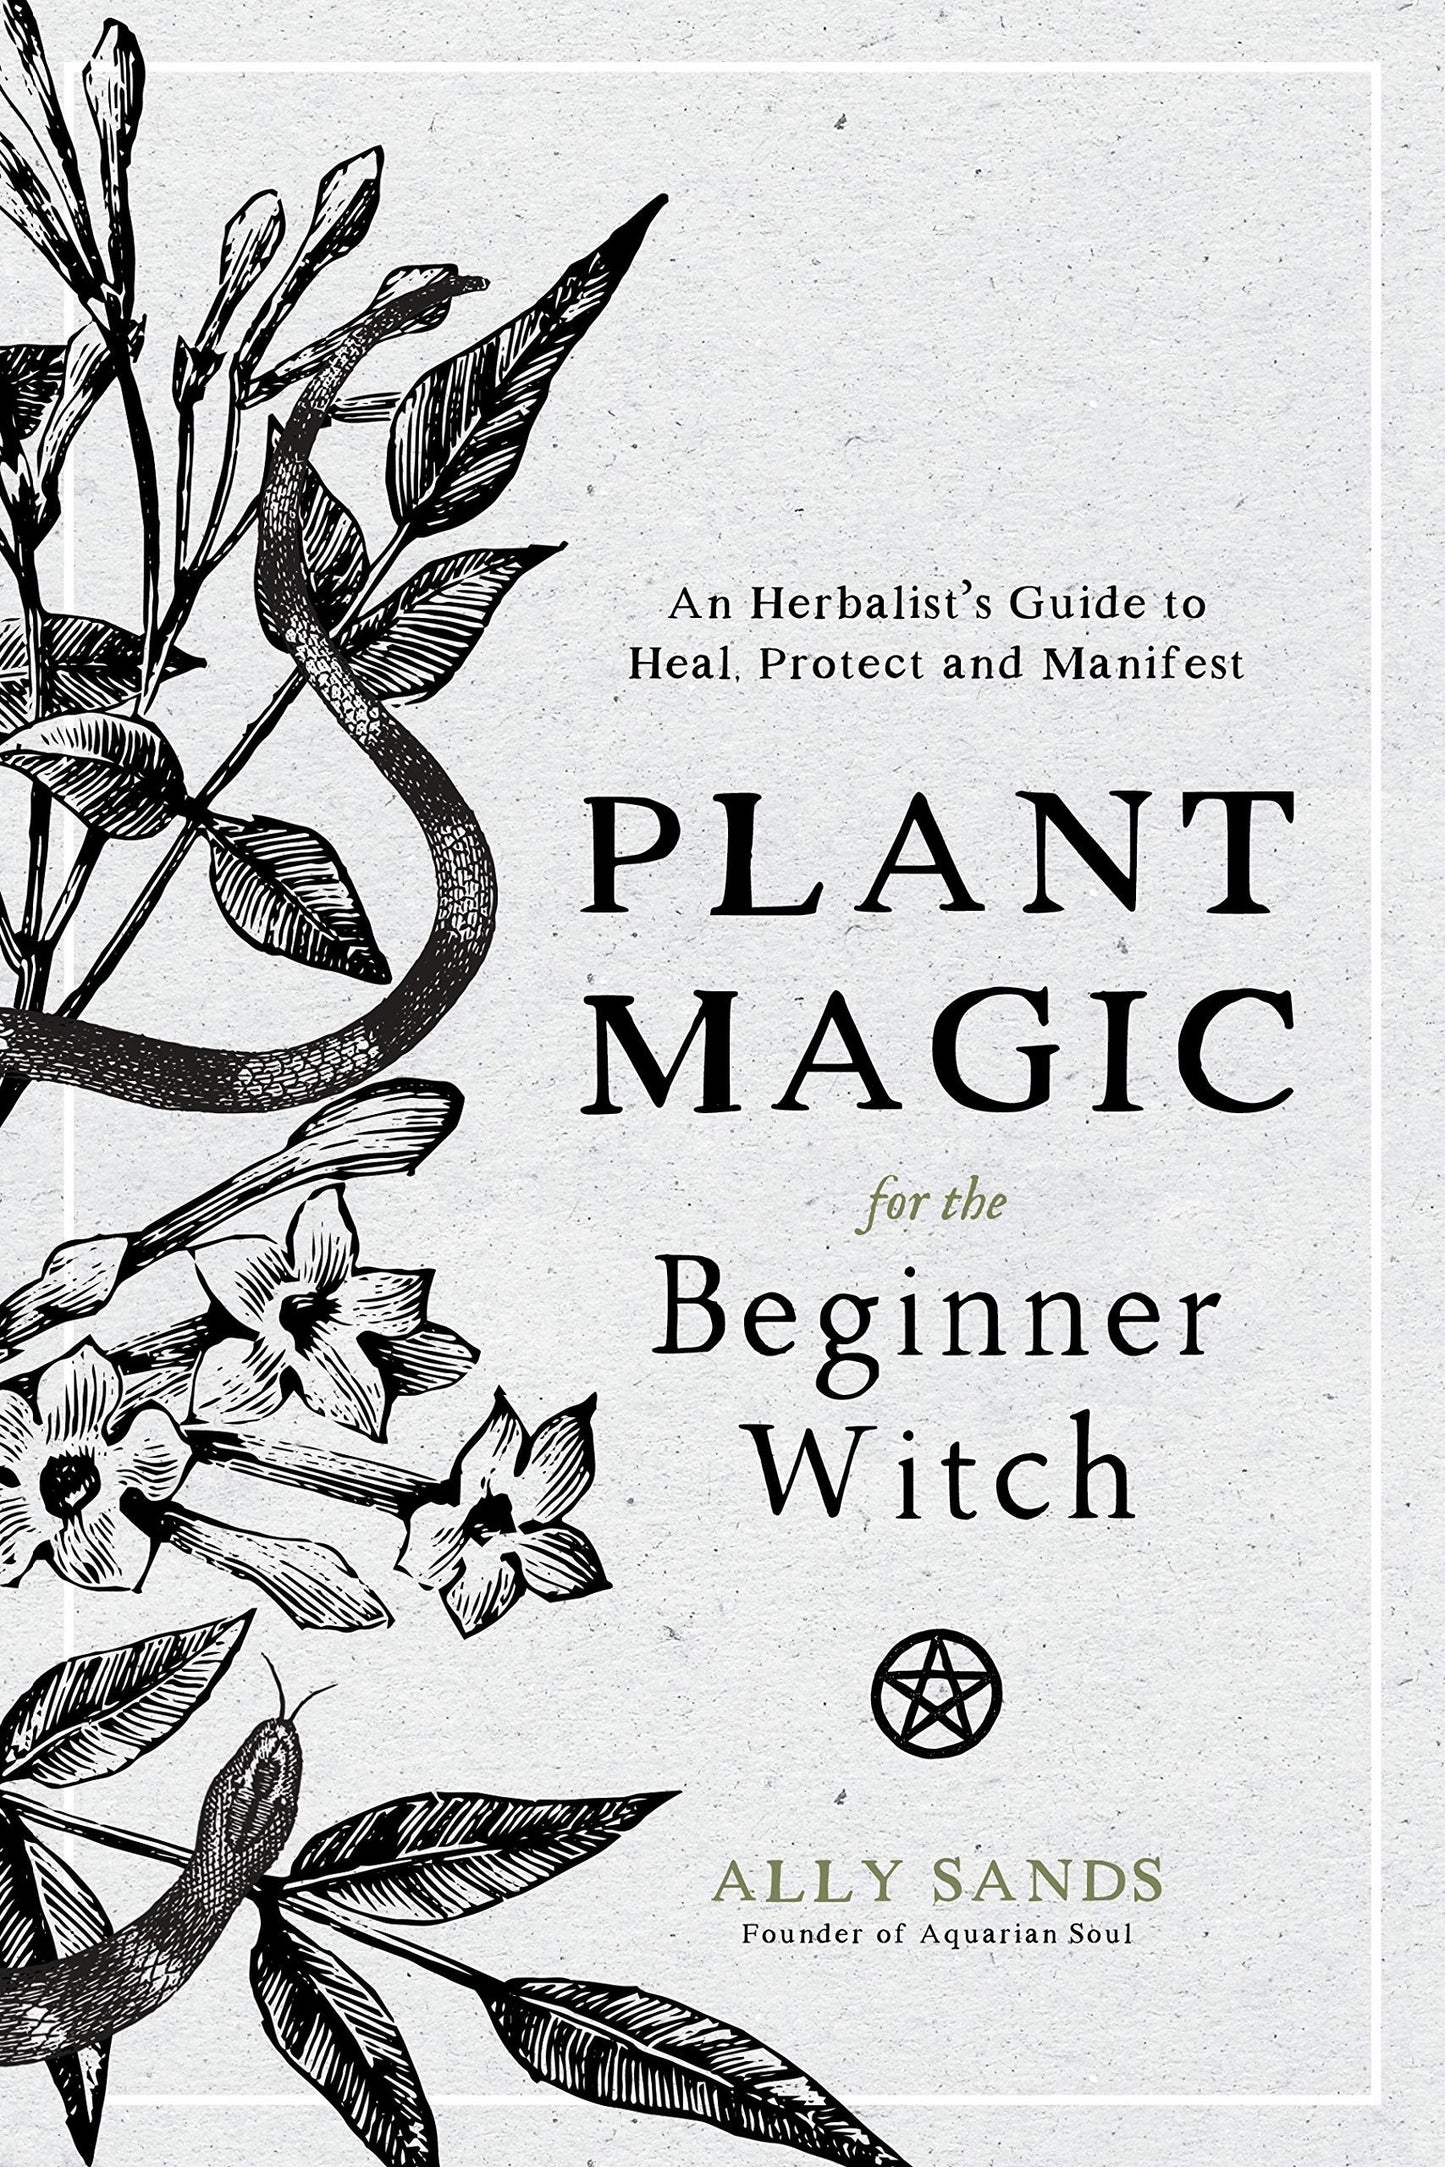 Book cover of Plant Magic for the Beginner Witch by Ally Sands.